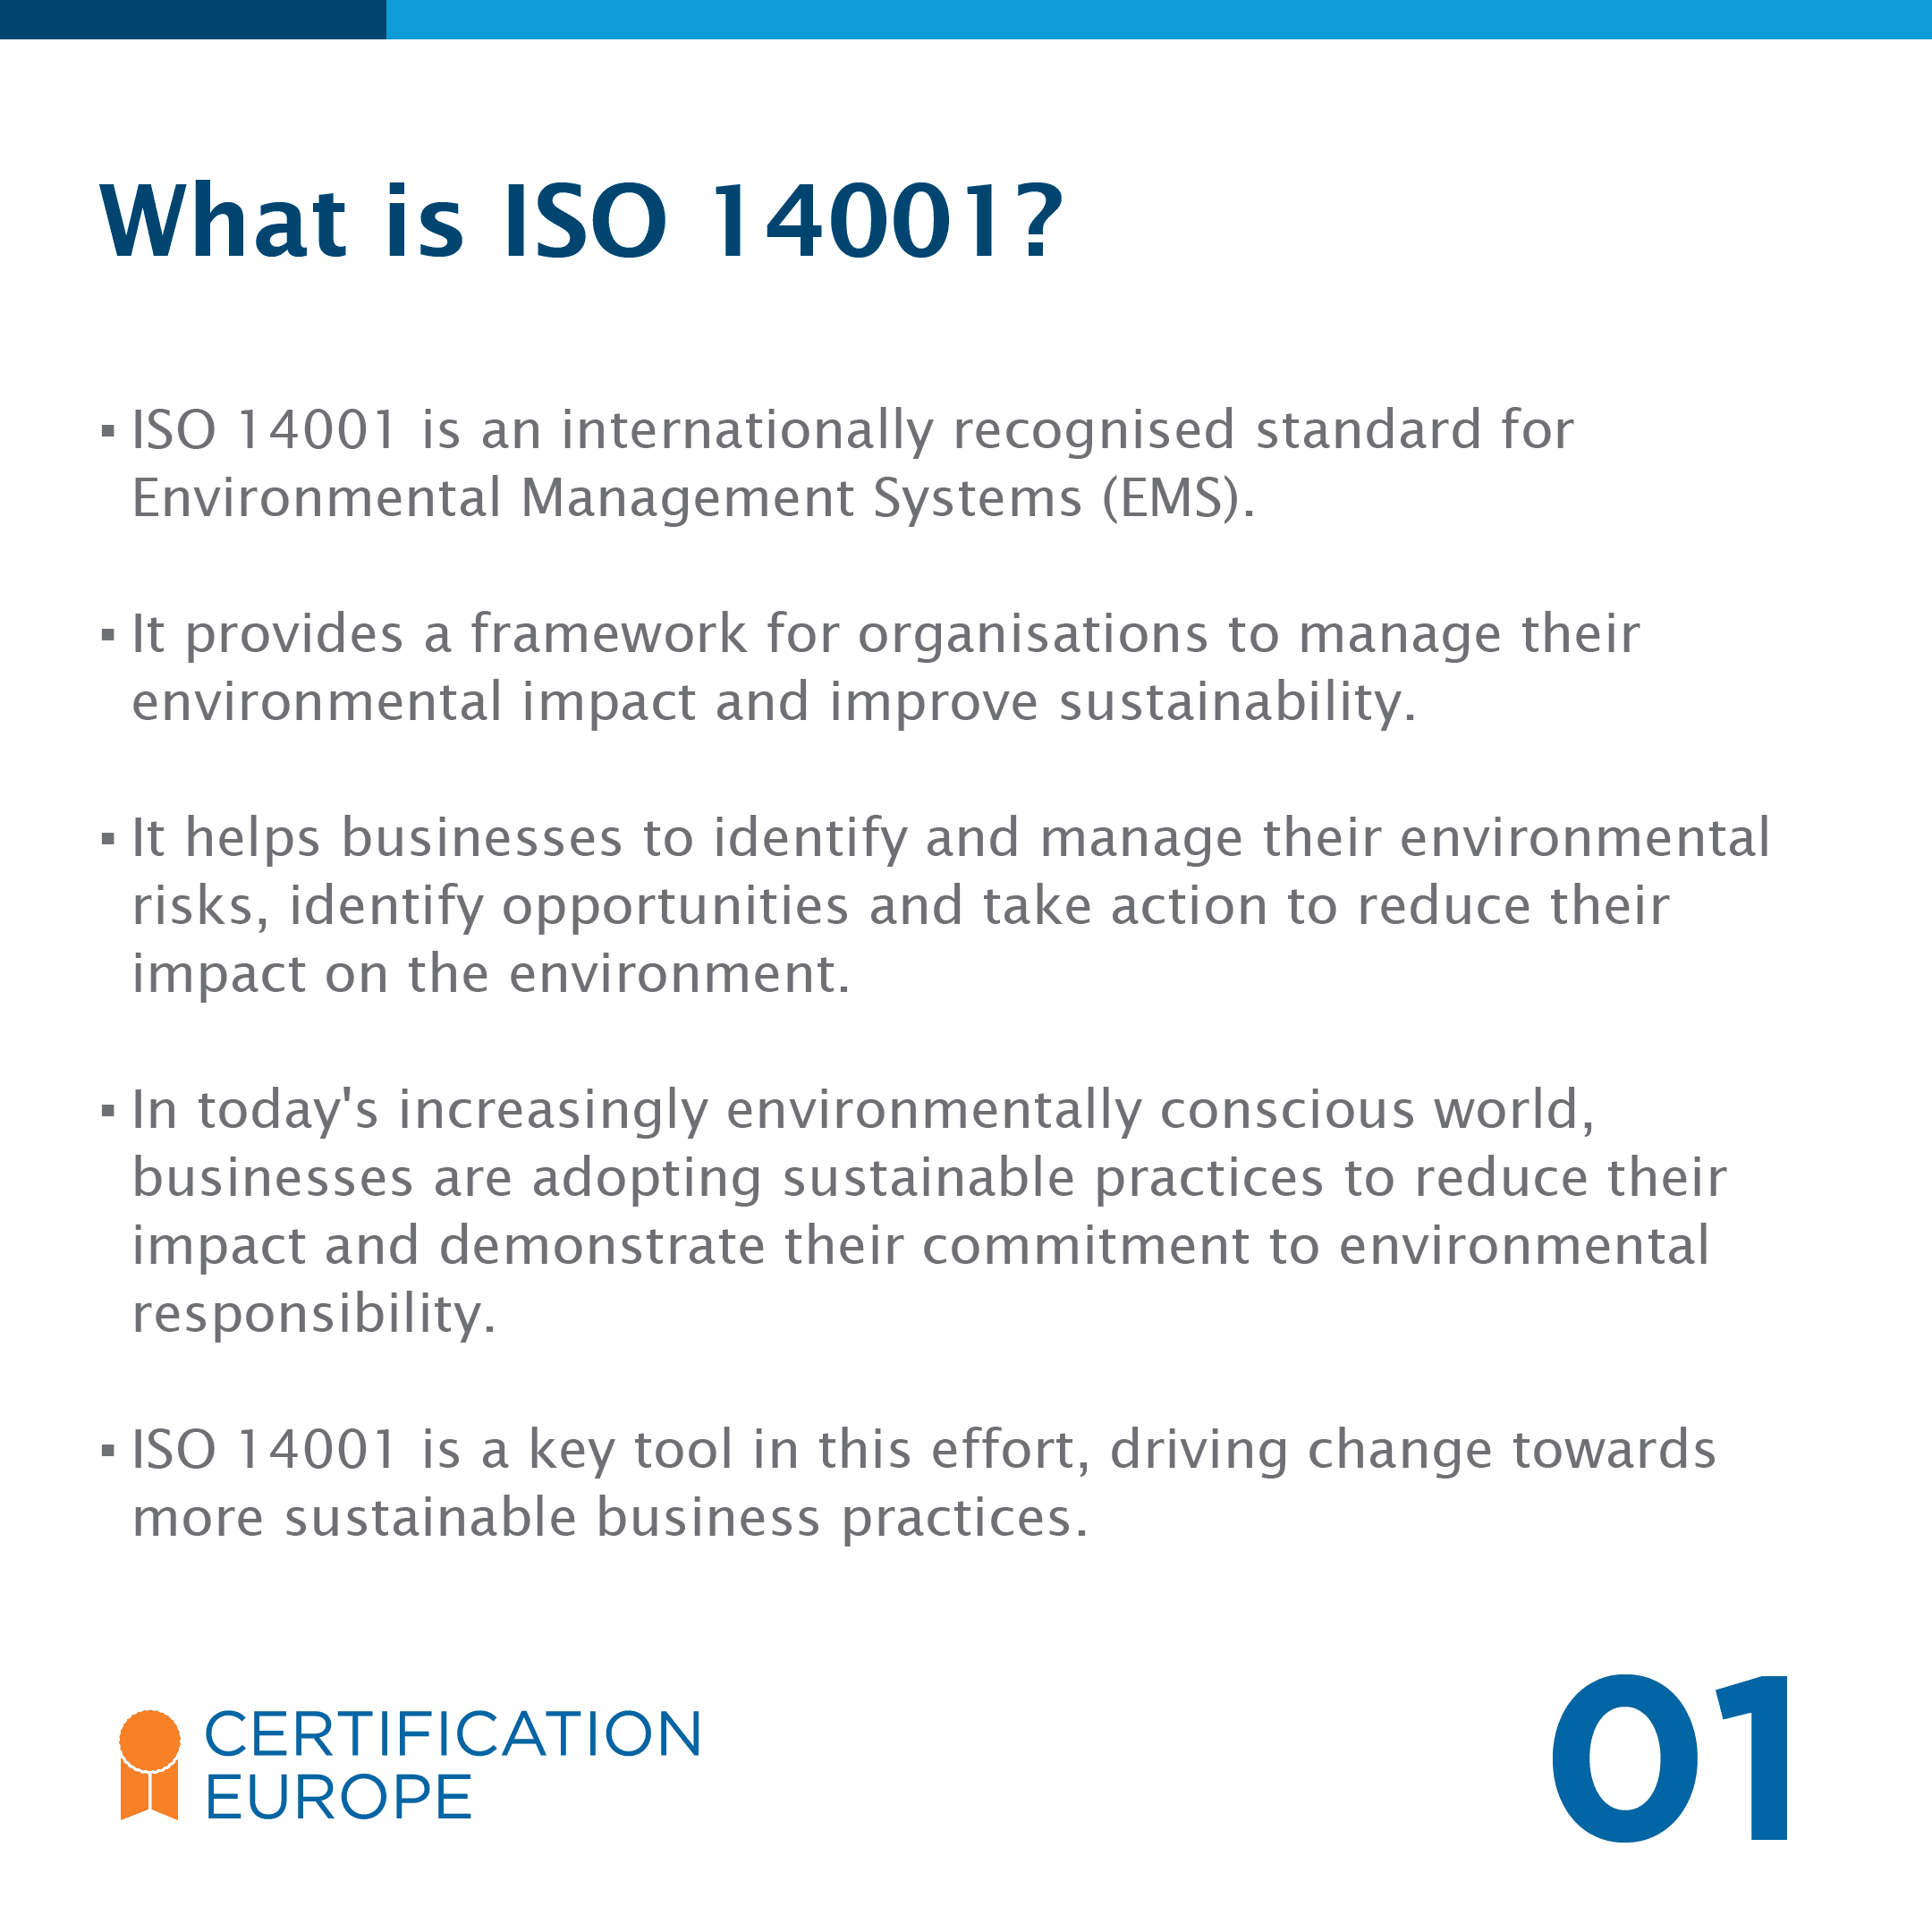 How ISO 14001 is Driving Changes - 1